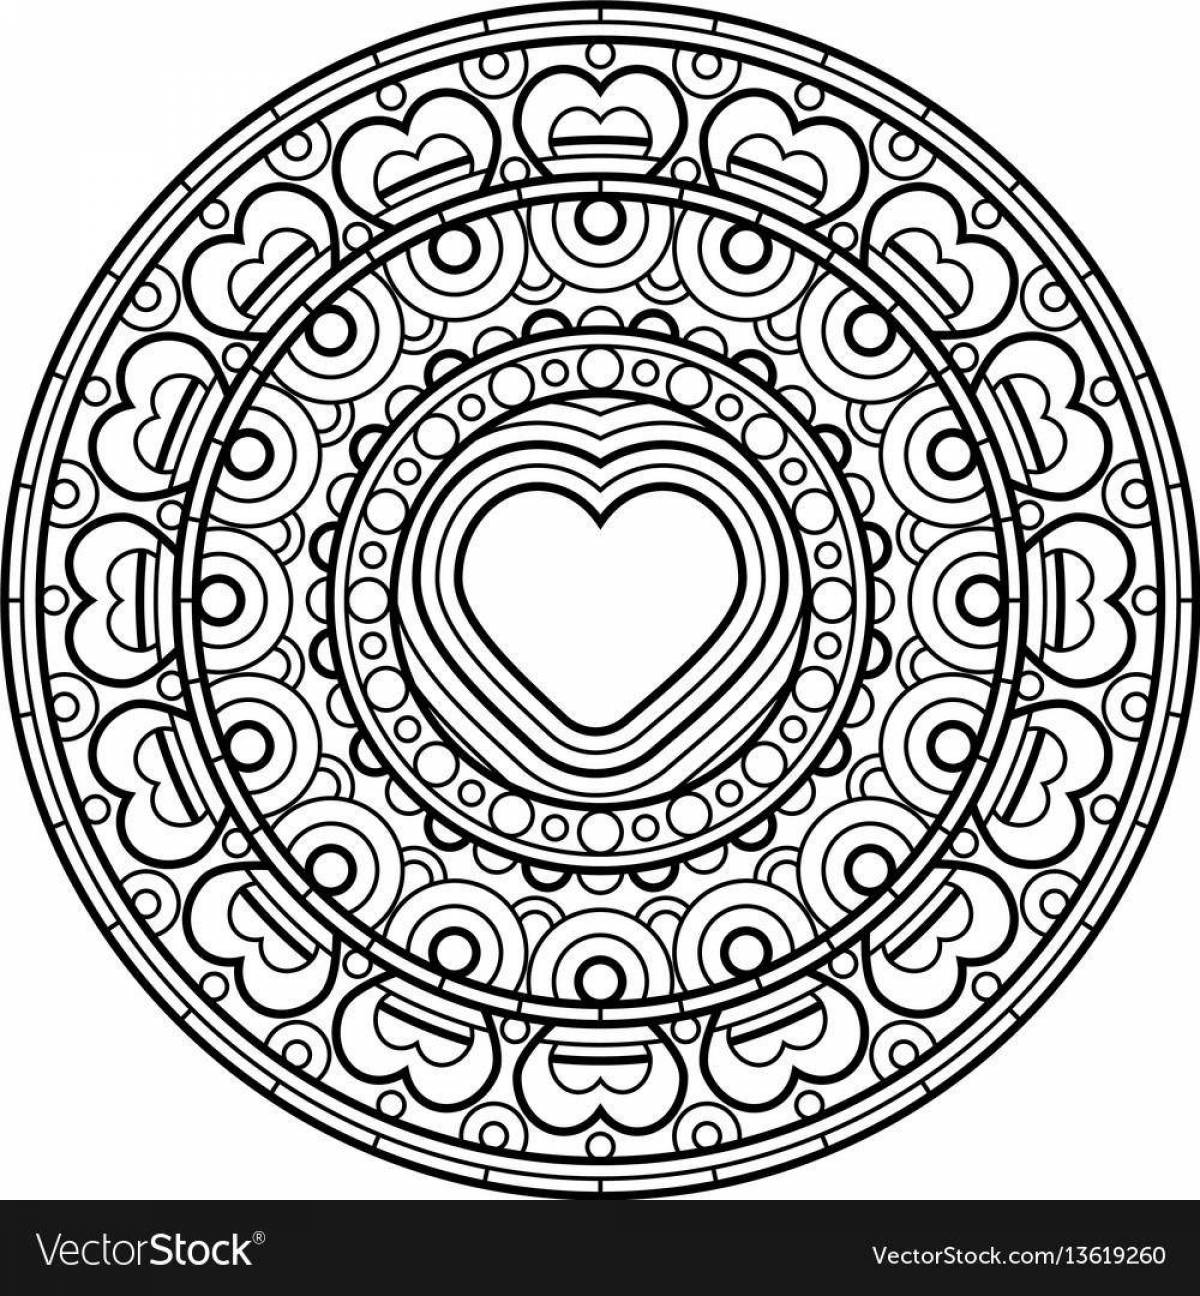 Coloring book exquisite circle pattern